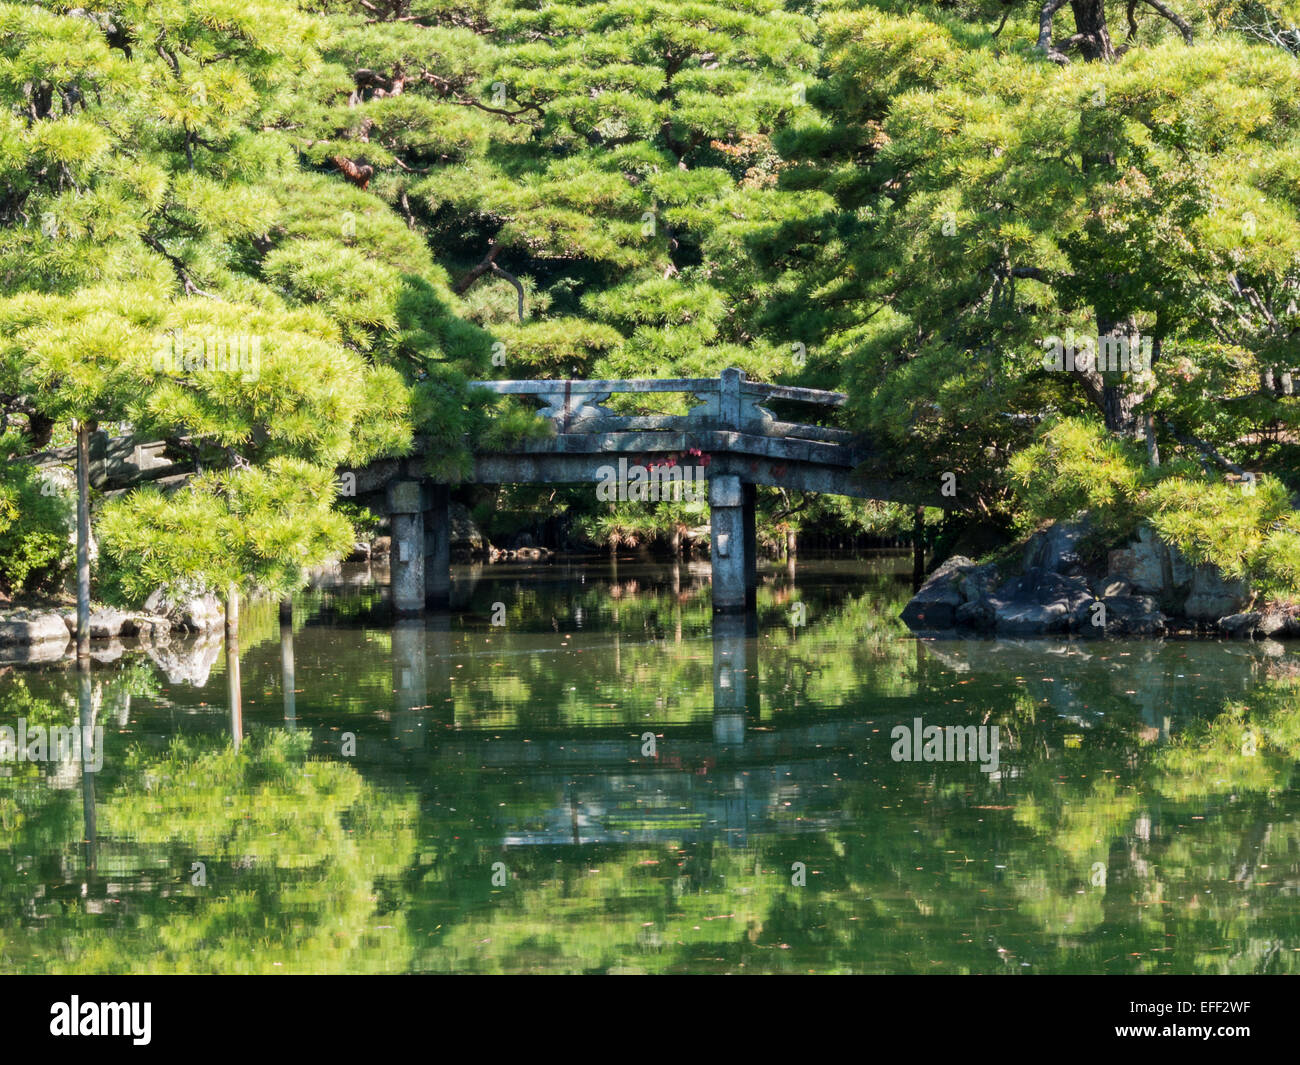 Kyoto Imperial Palace garden with bridge reflected in the water Stock Photo